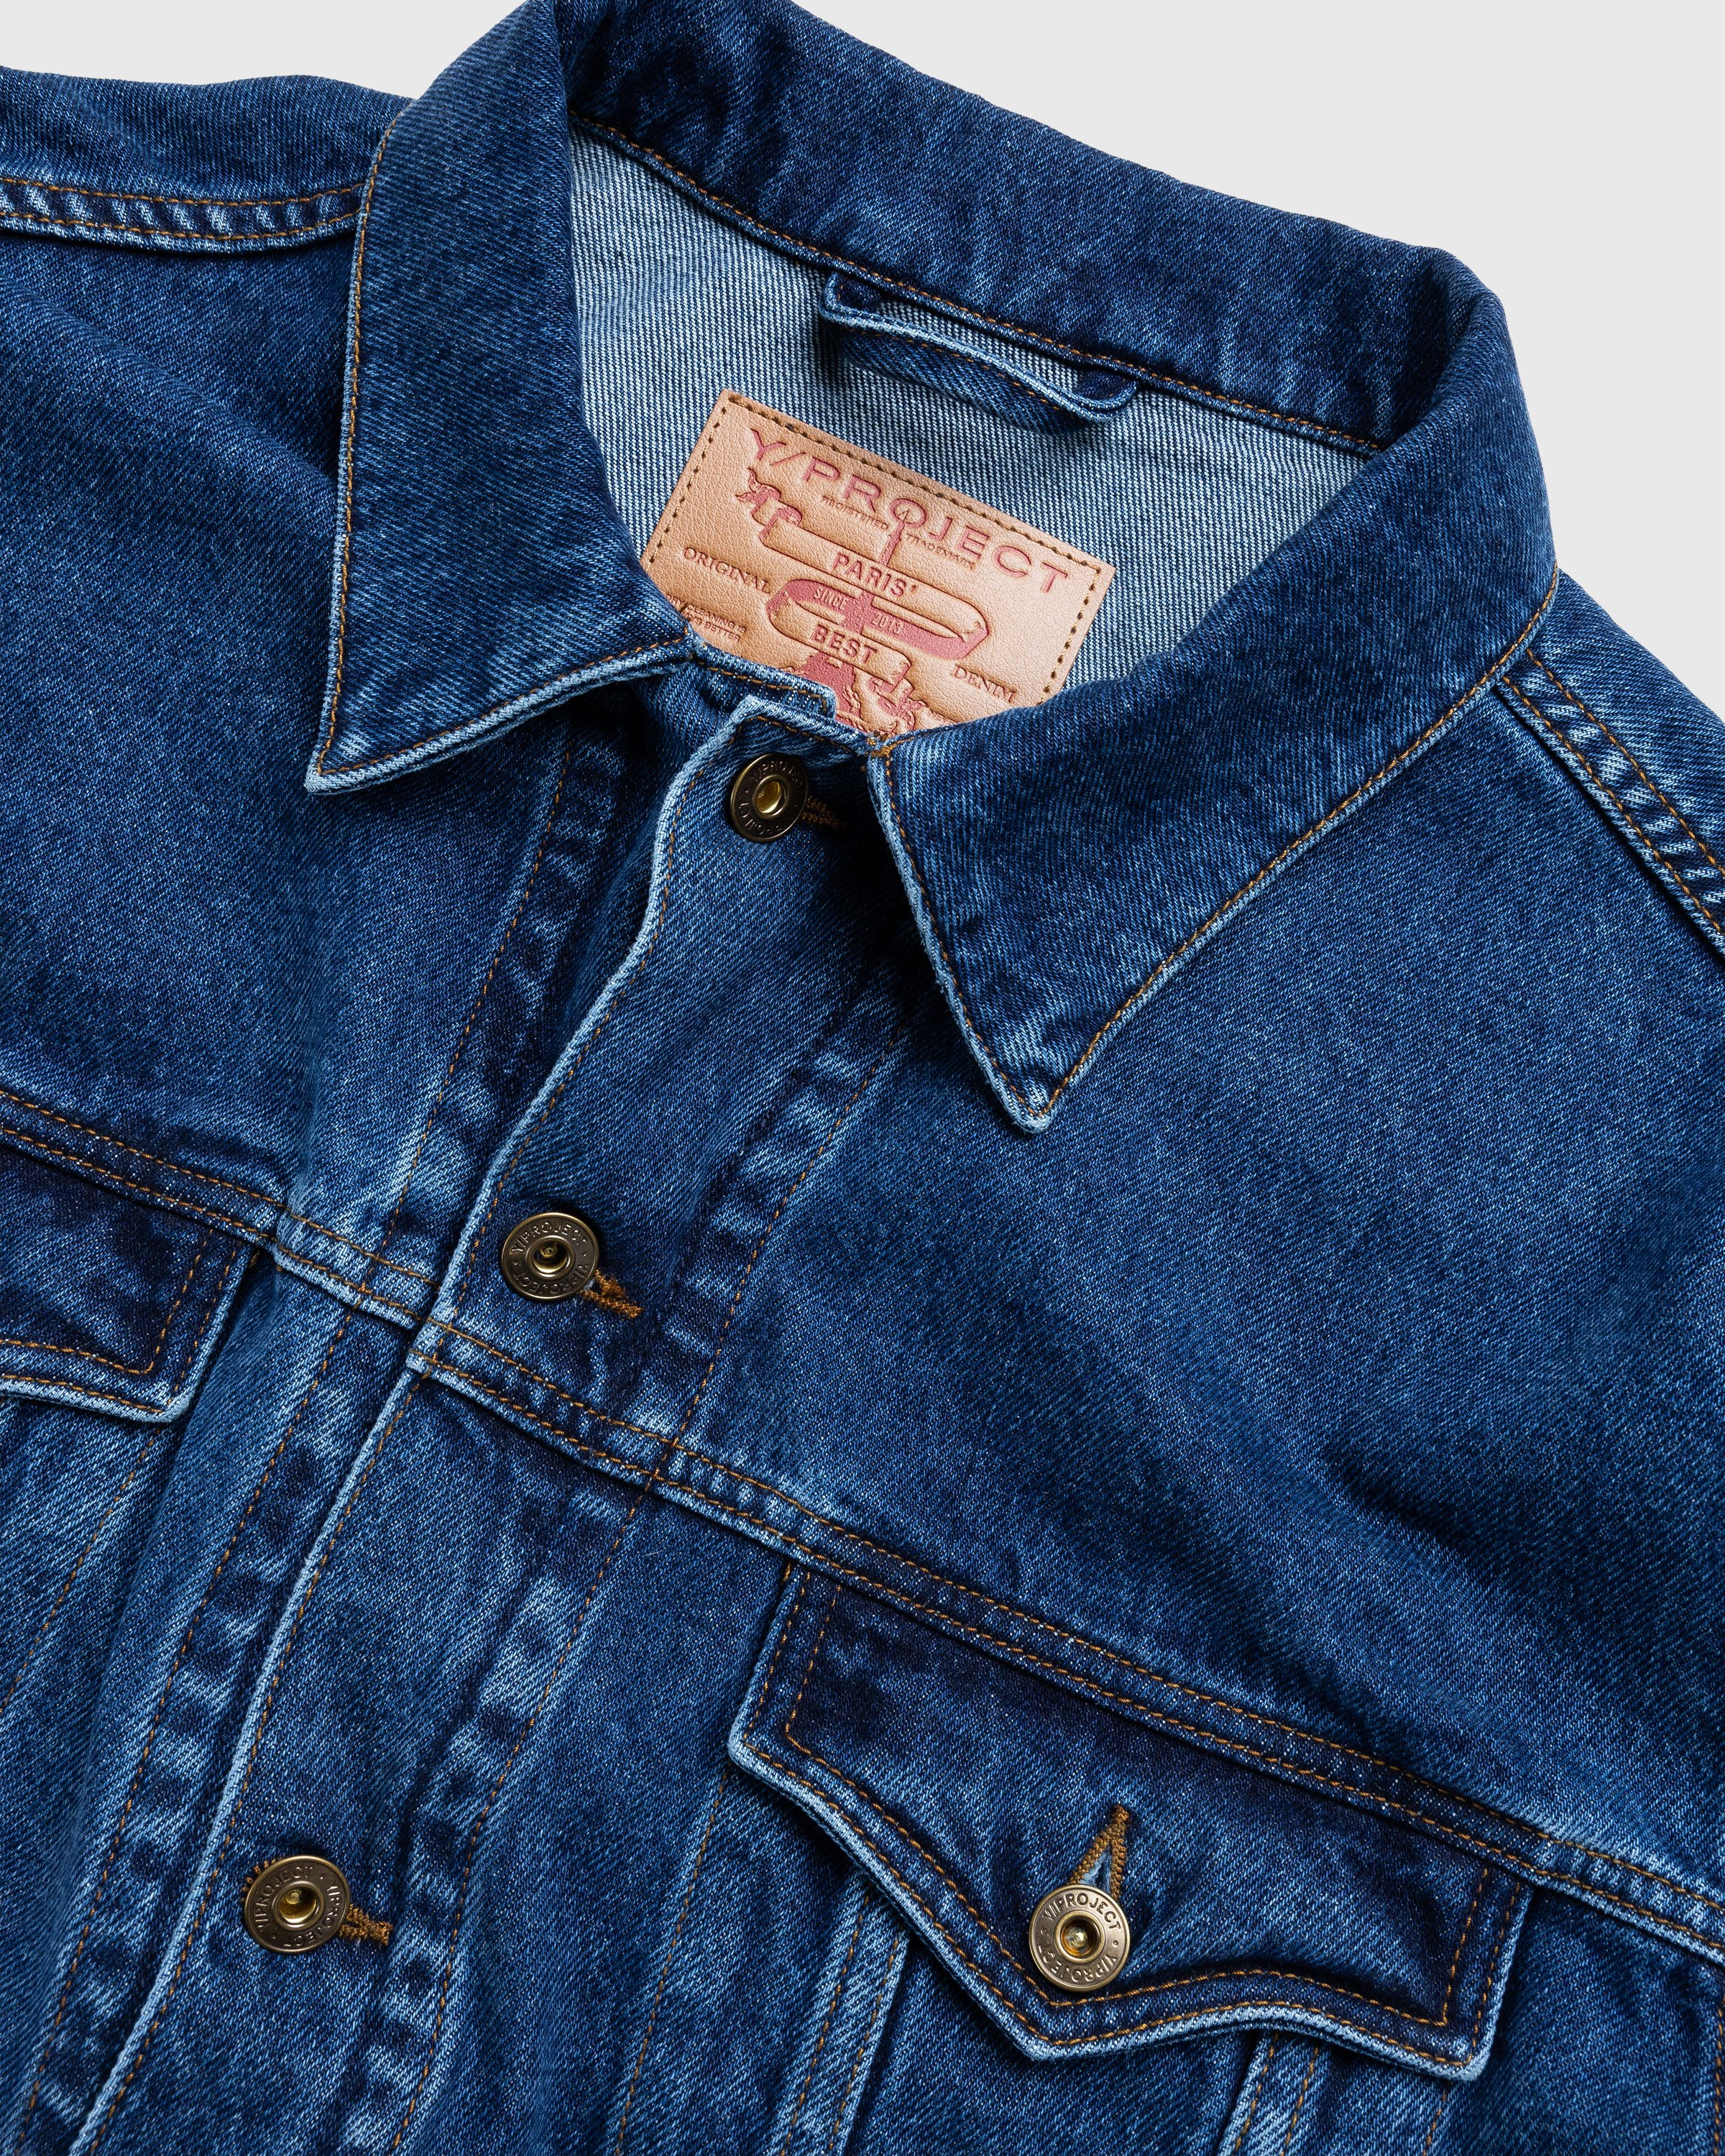 Y/Project - Classic Wire Denim Jacket Navy - Clothing - Blue - Image 5